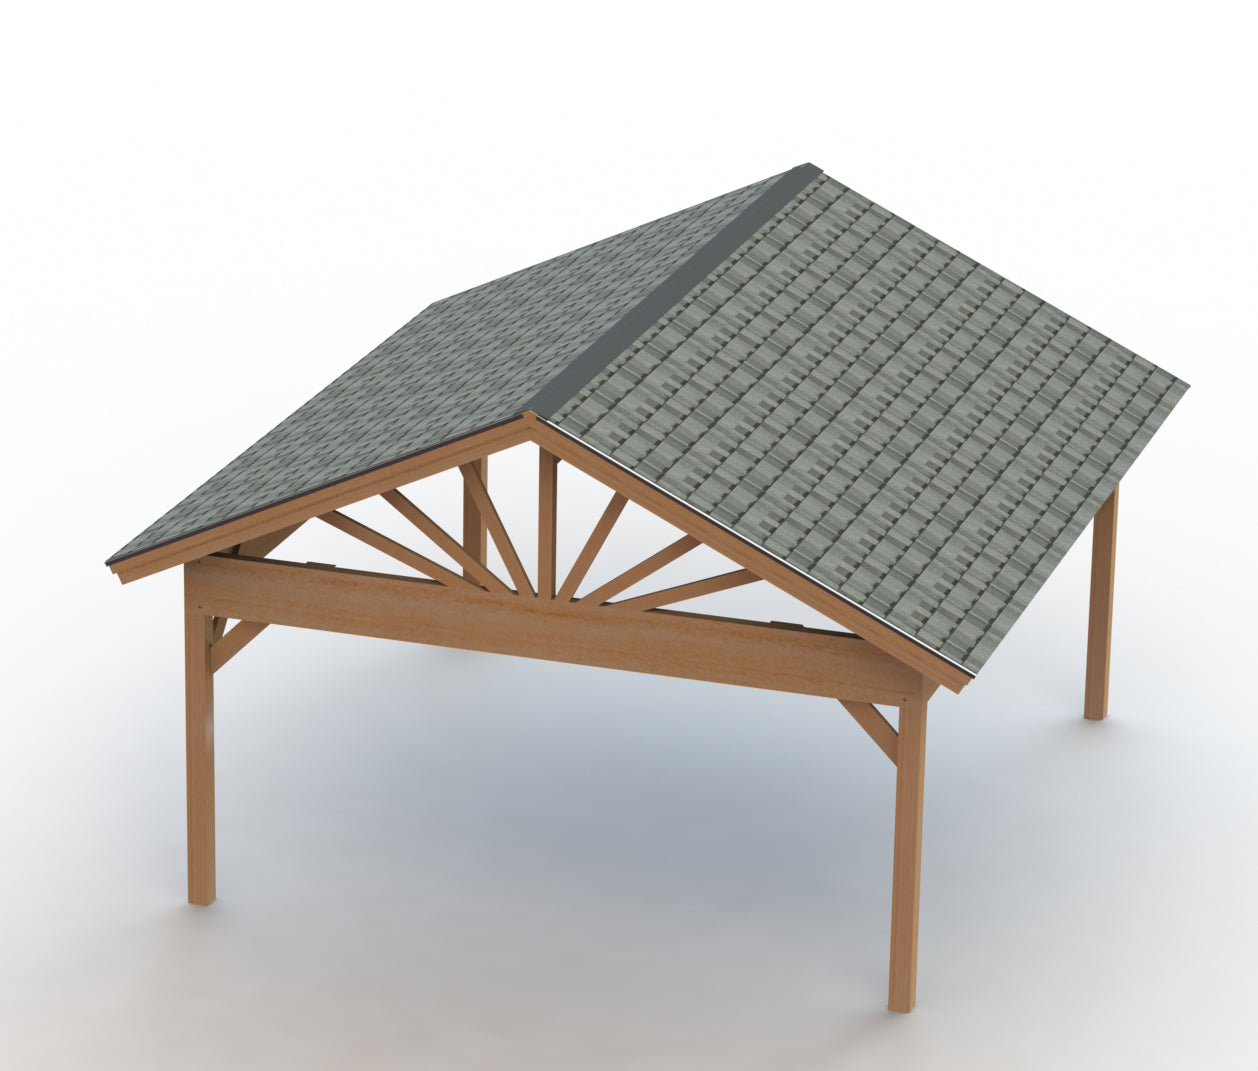 Gazebo Building Plans-Gable Roof  | 16x18 | Perfect for Hot Tubs